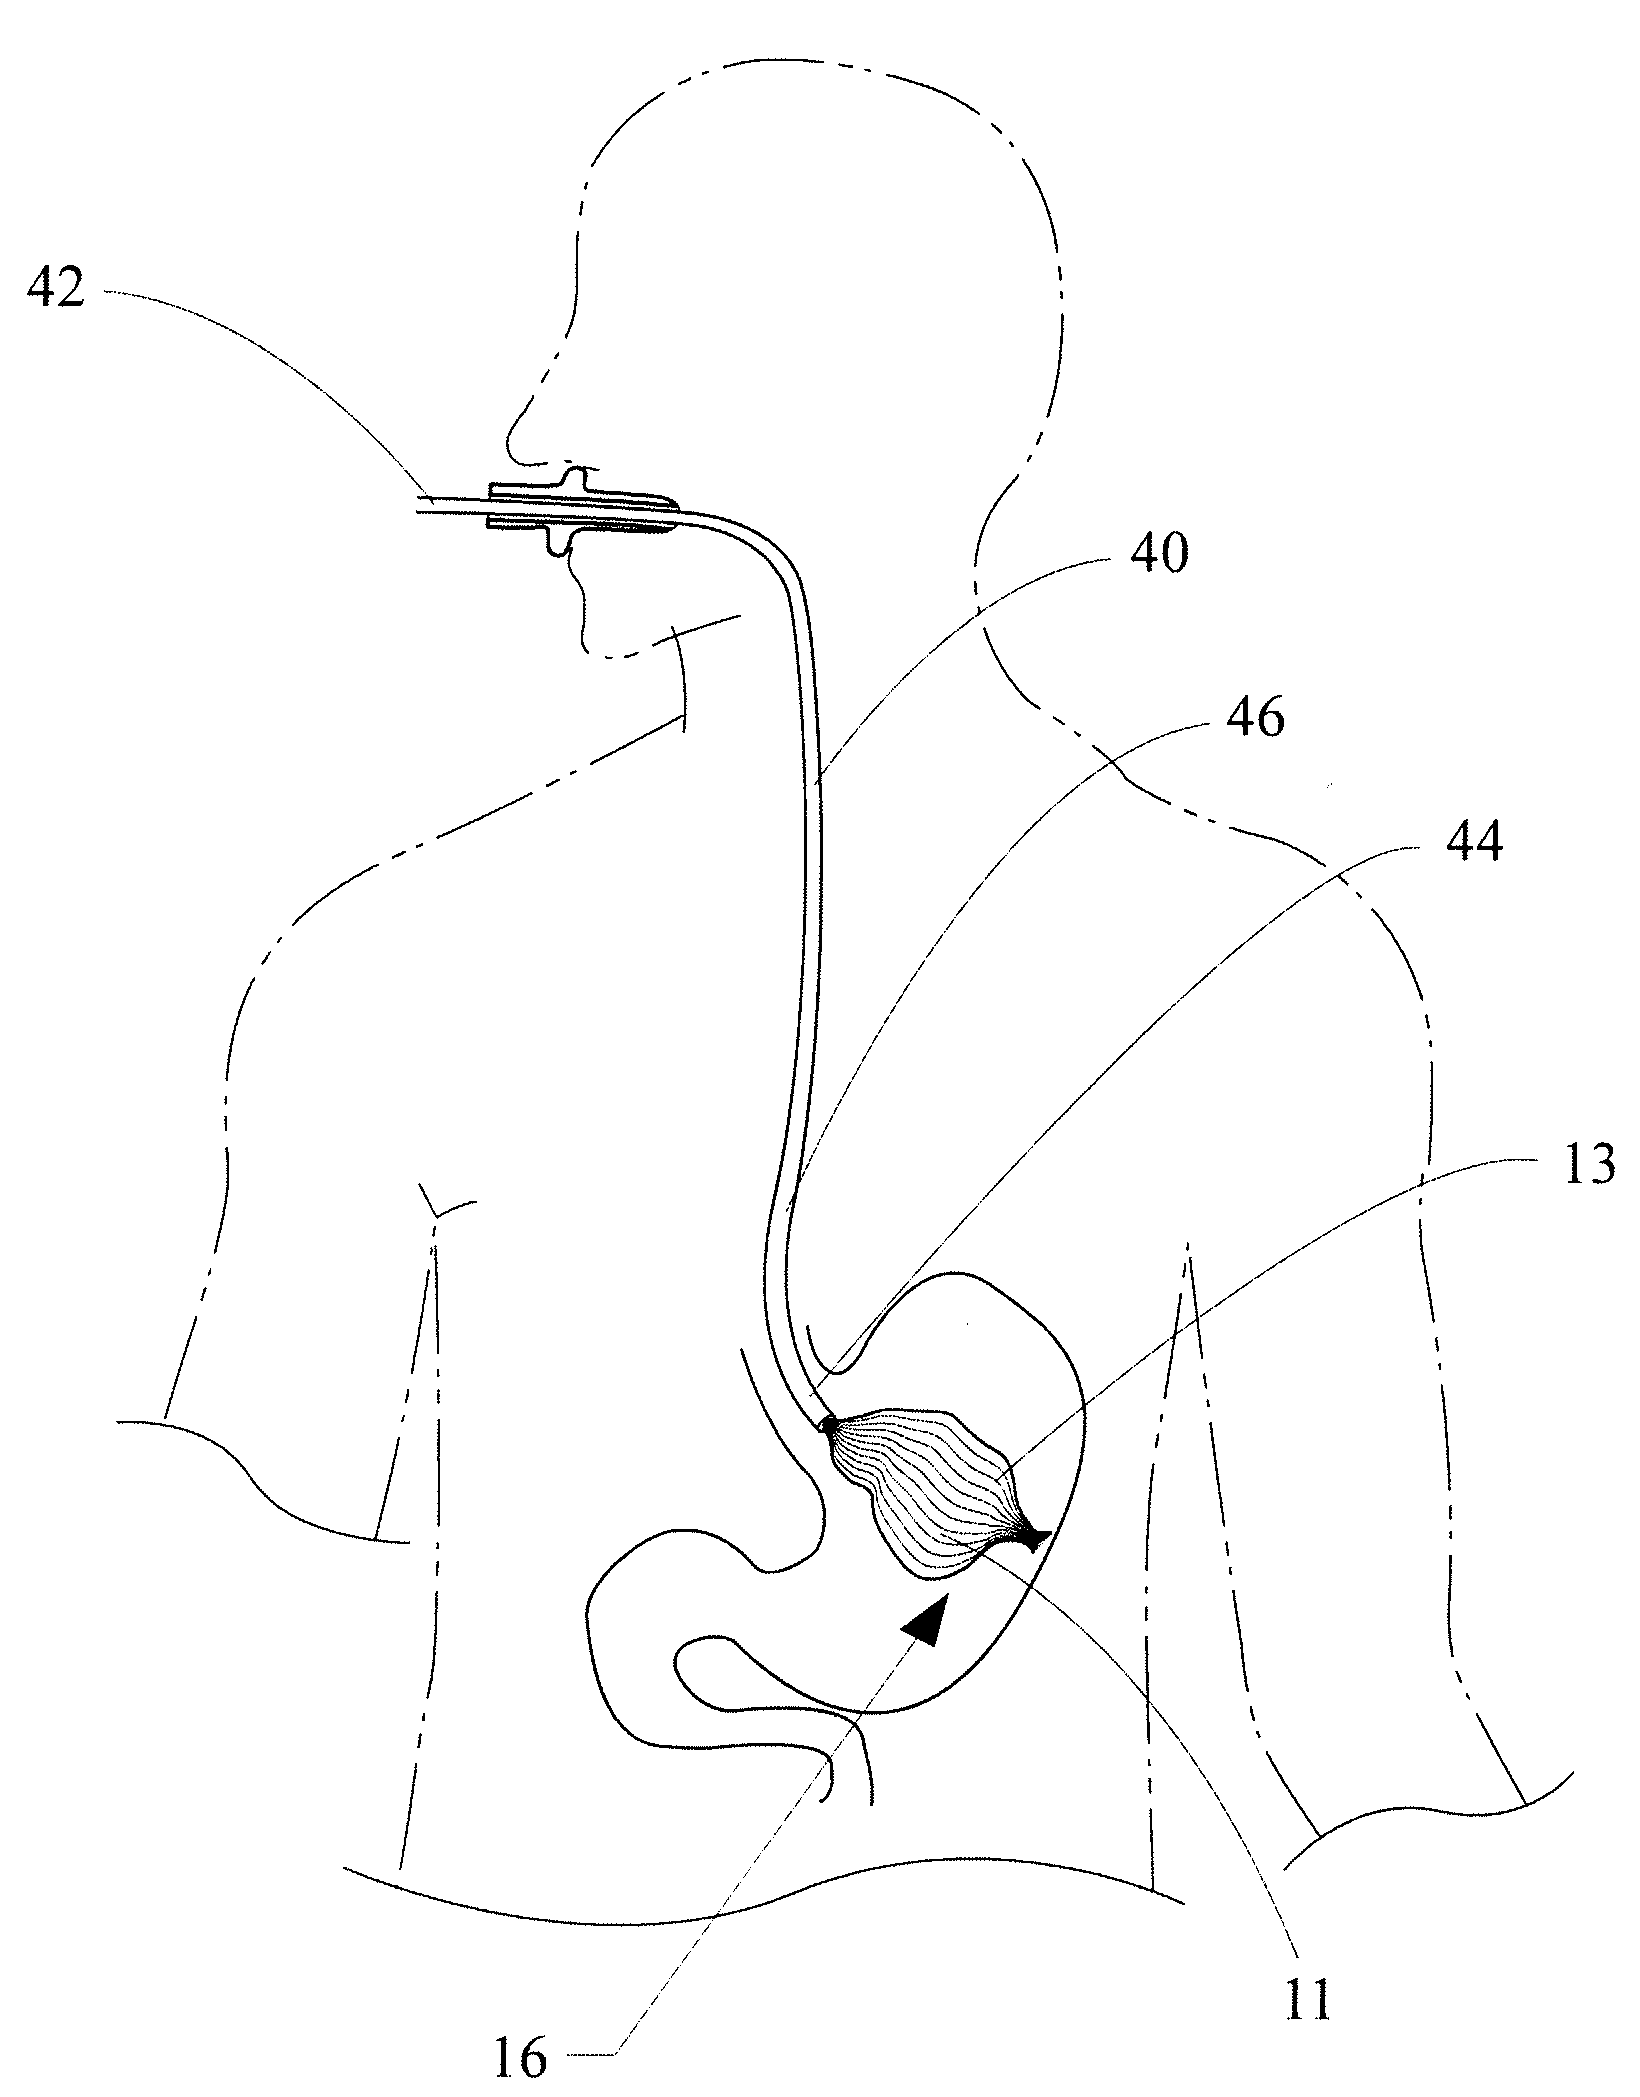 Intragastric bag apparatus and method of delivery for treating obesity